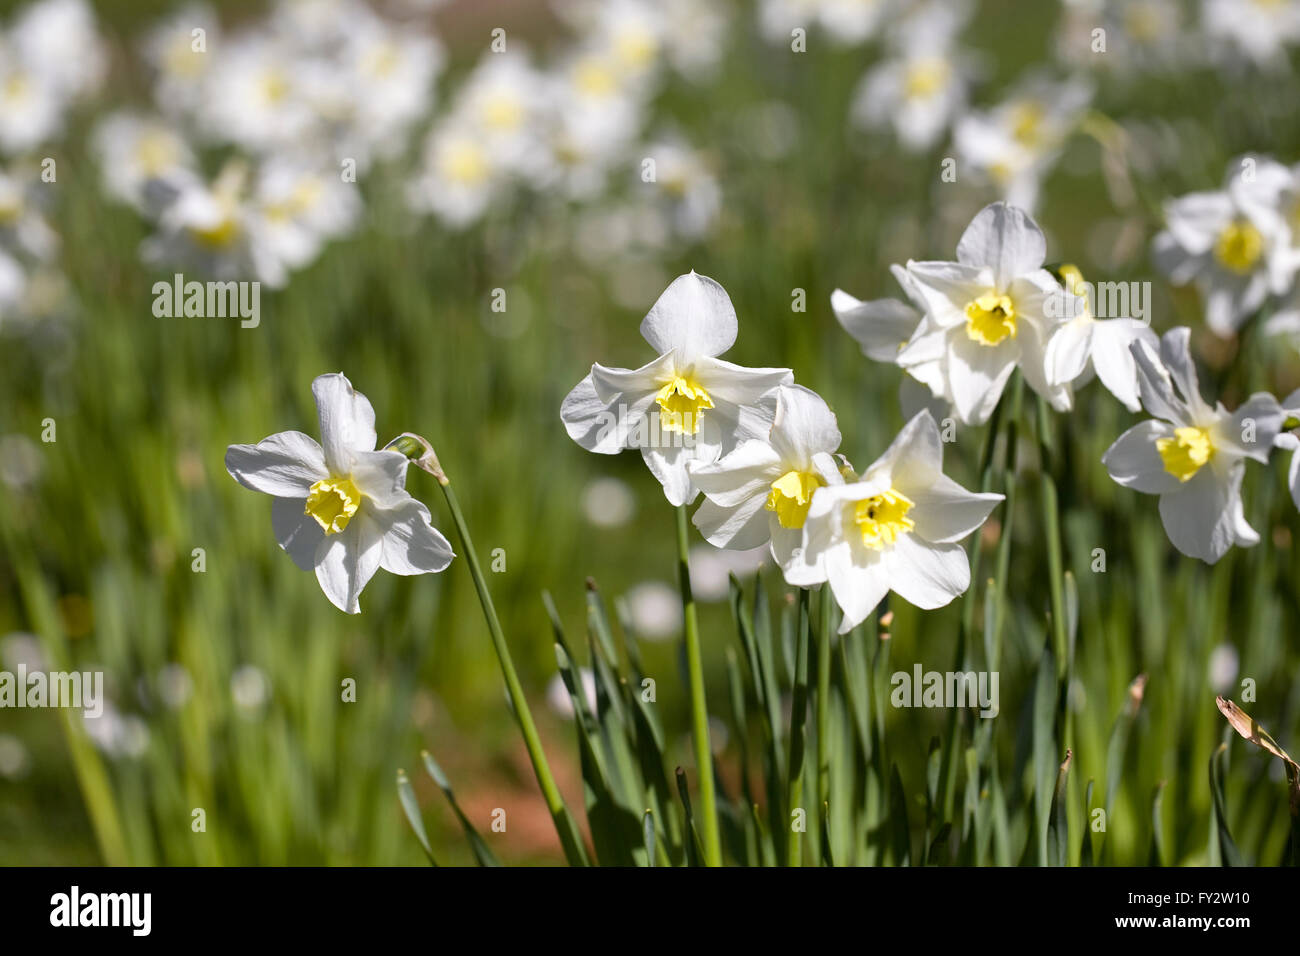 Narcissus 'Seagull' flowers. Stock Photo